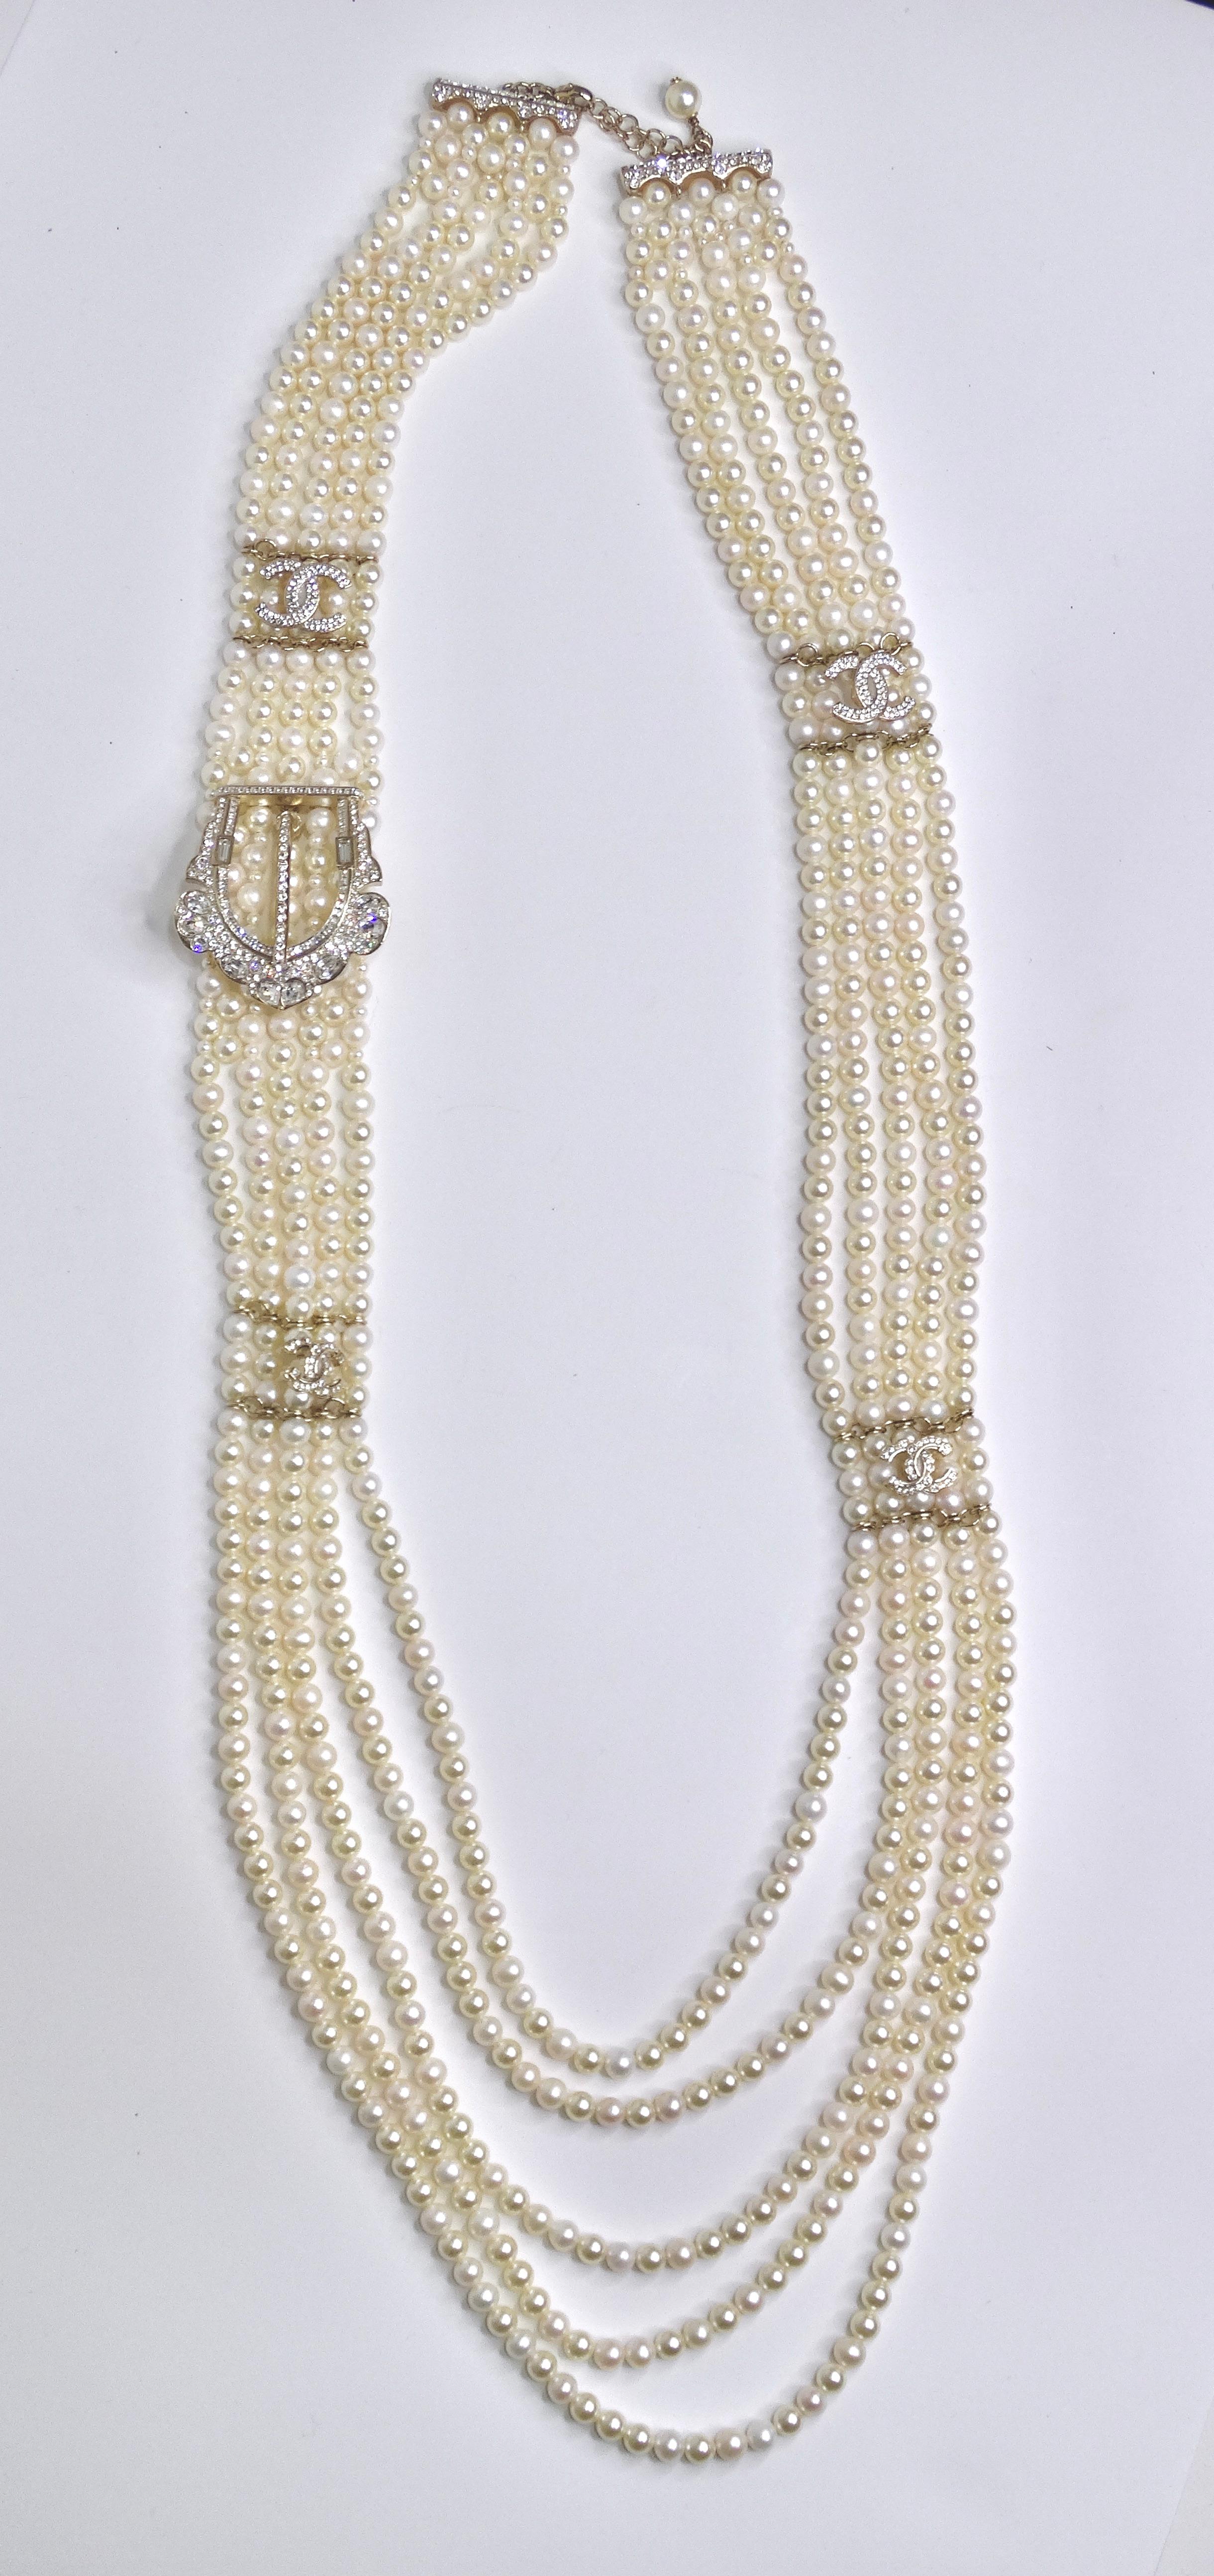 Bead Chanel Pearls & Crystal Buckle Multi-Strand Necklace For Sale